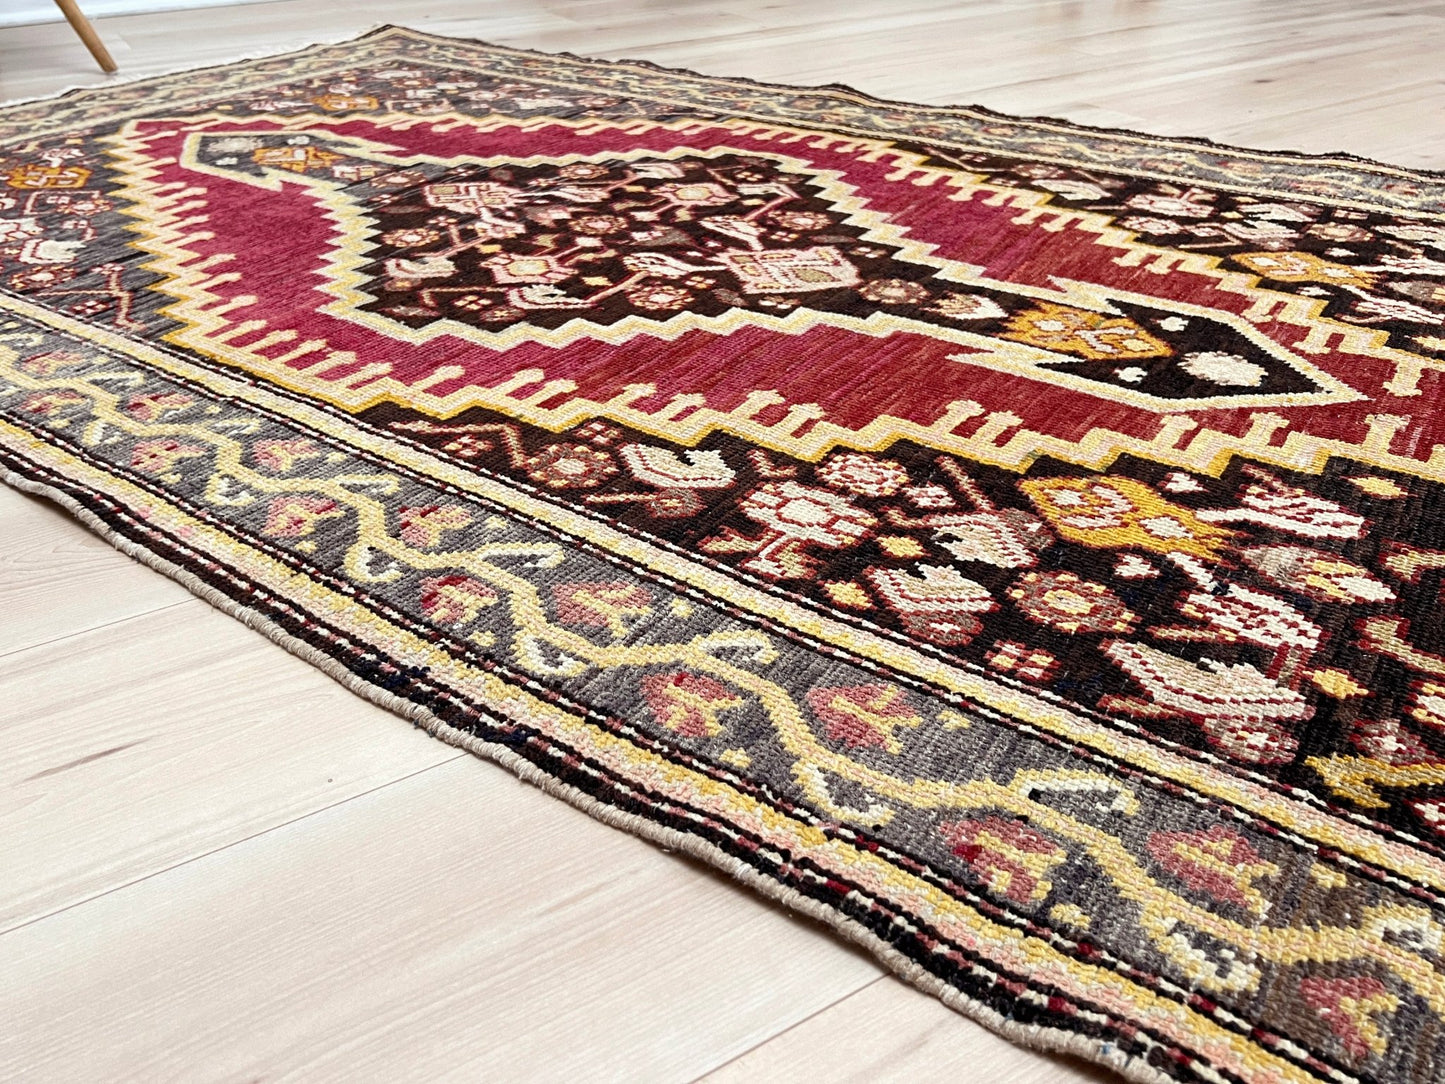 Derbend Caucasian 4x6 ft small Scatter handmade rug. Oriental rug shop San francisco bay area. Buy rug online free shipping